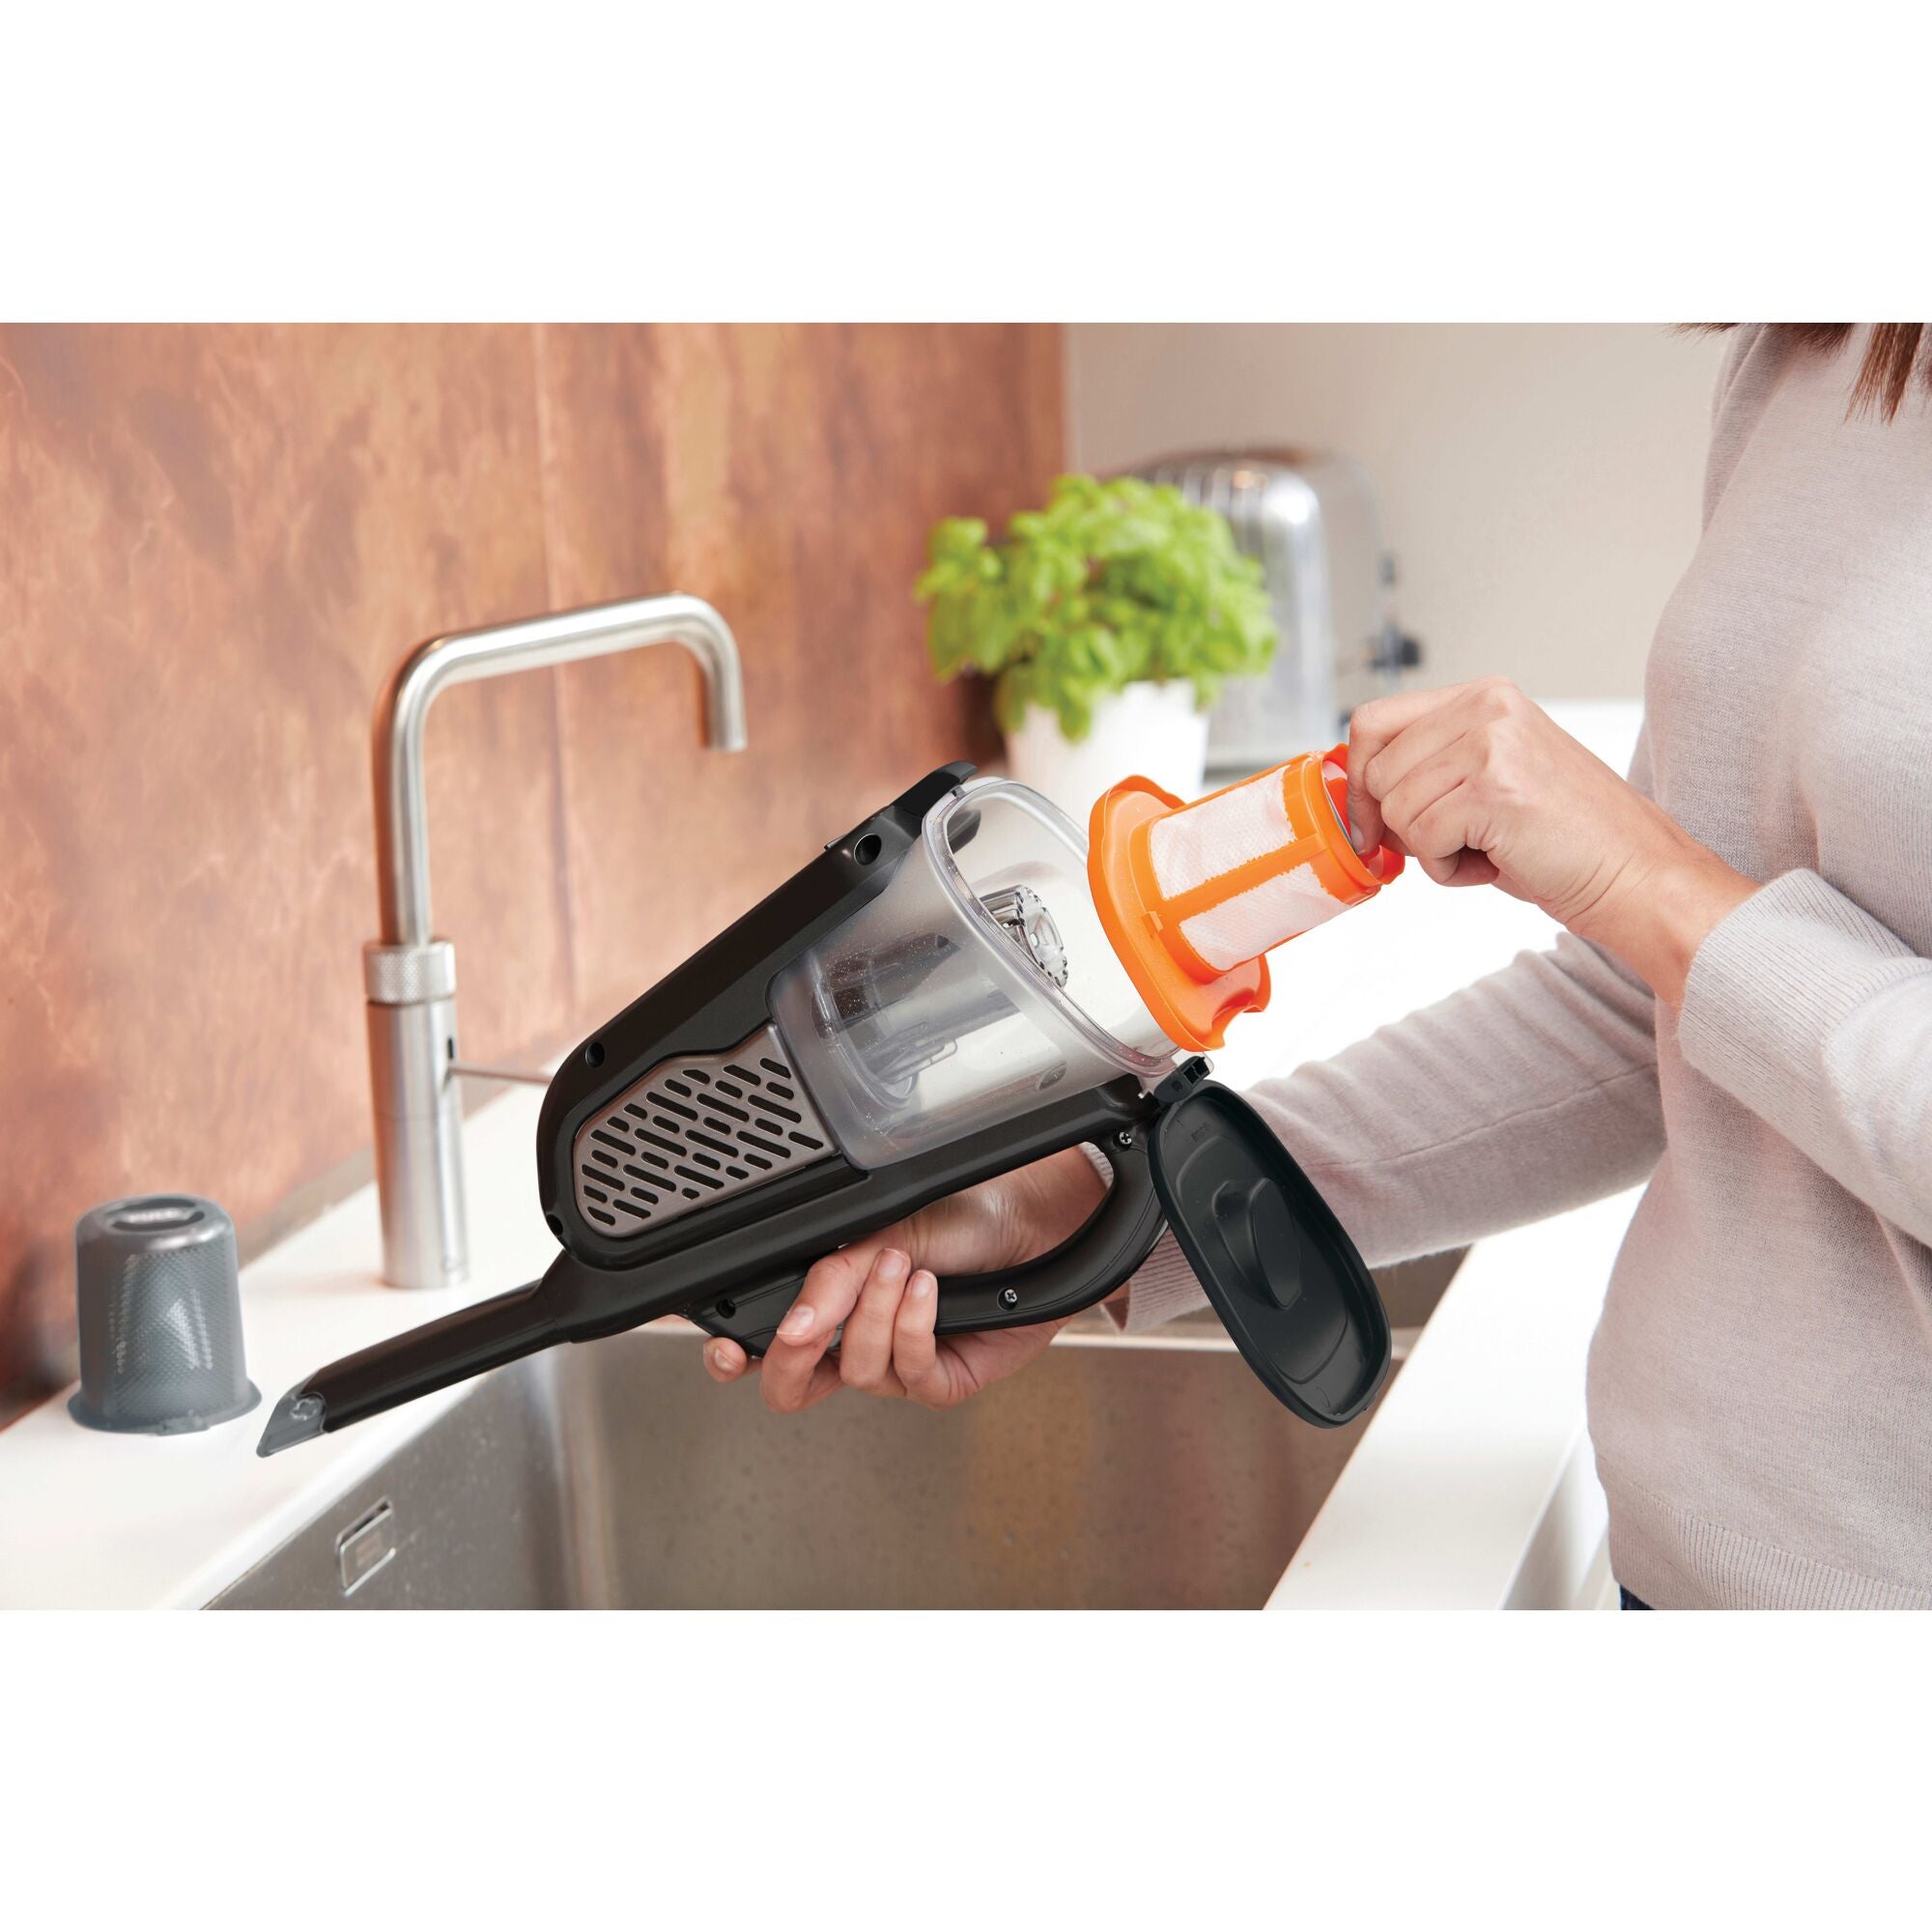 Easy empty extra large dustbin in a 20 volt dustbuster advanced clean cordless hand vacuum.